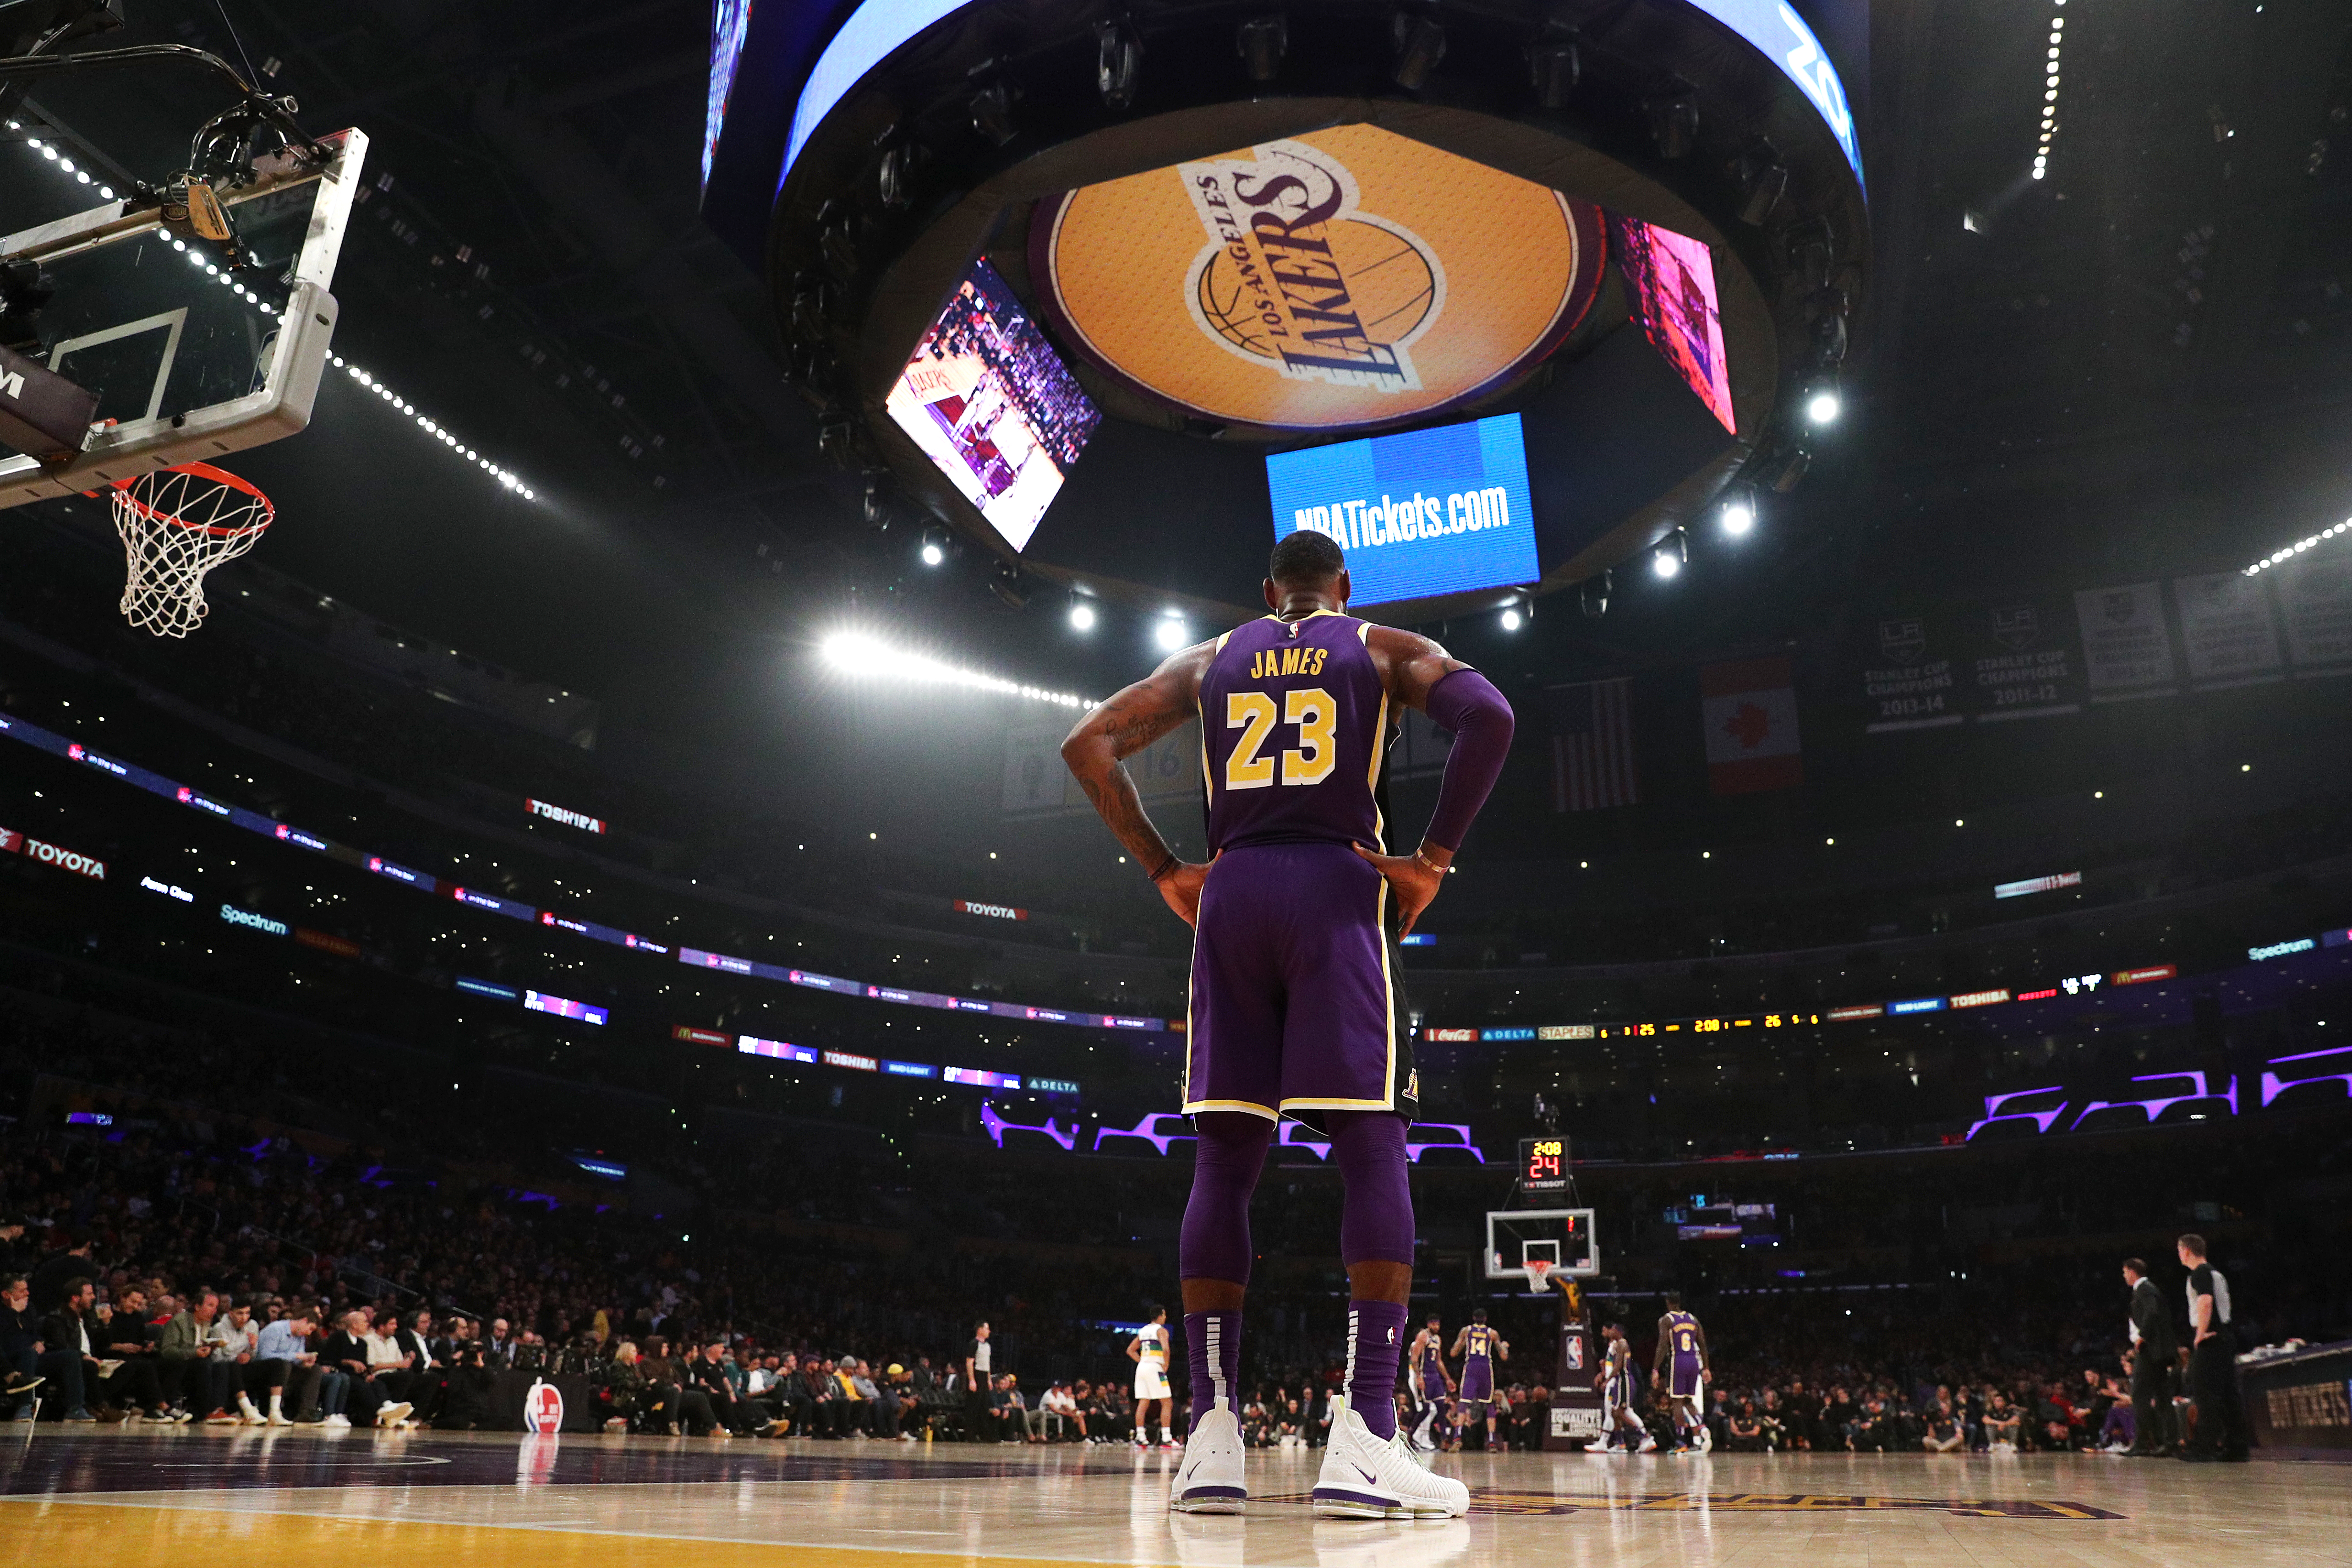 Lakers will not host fans at Staple Center until further notice